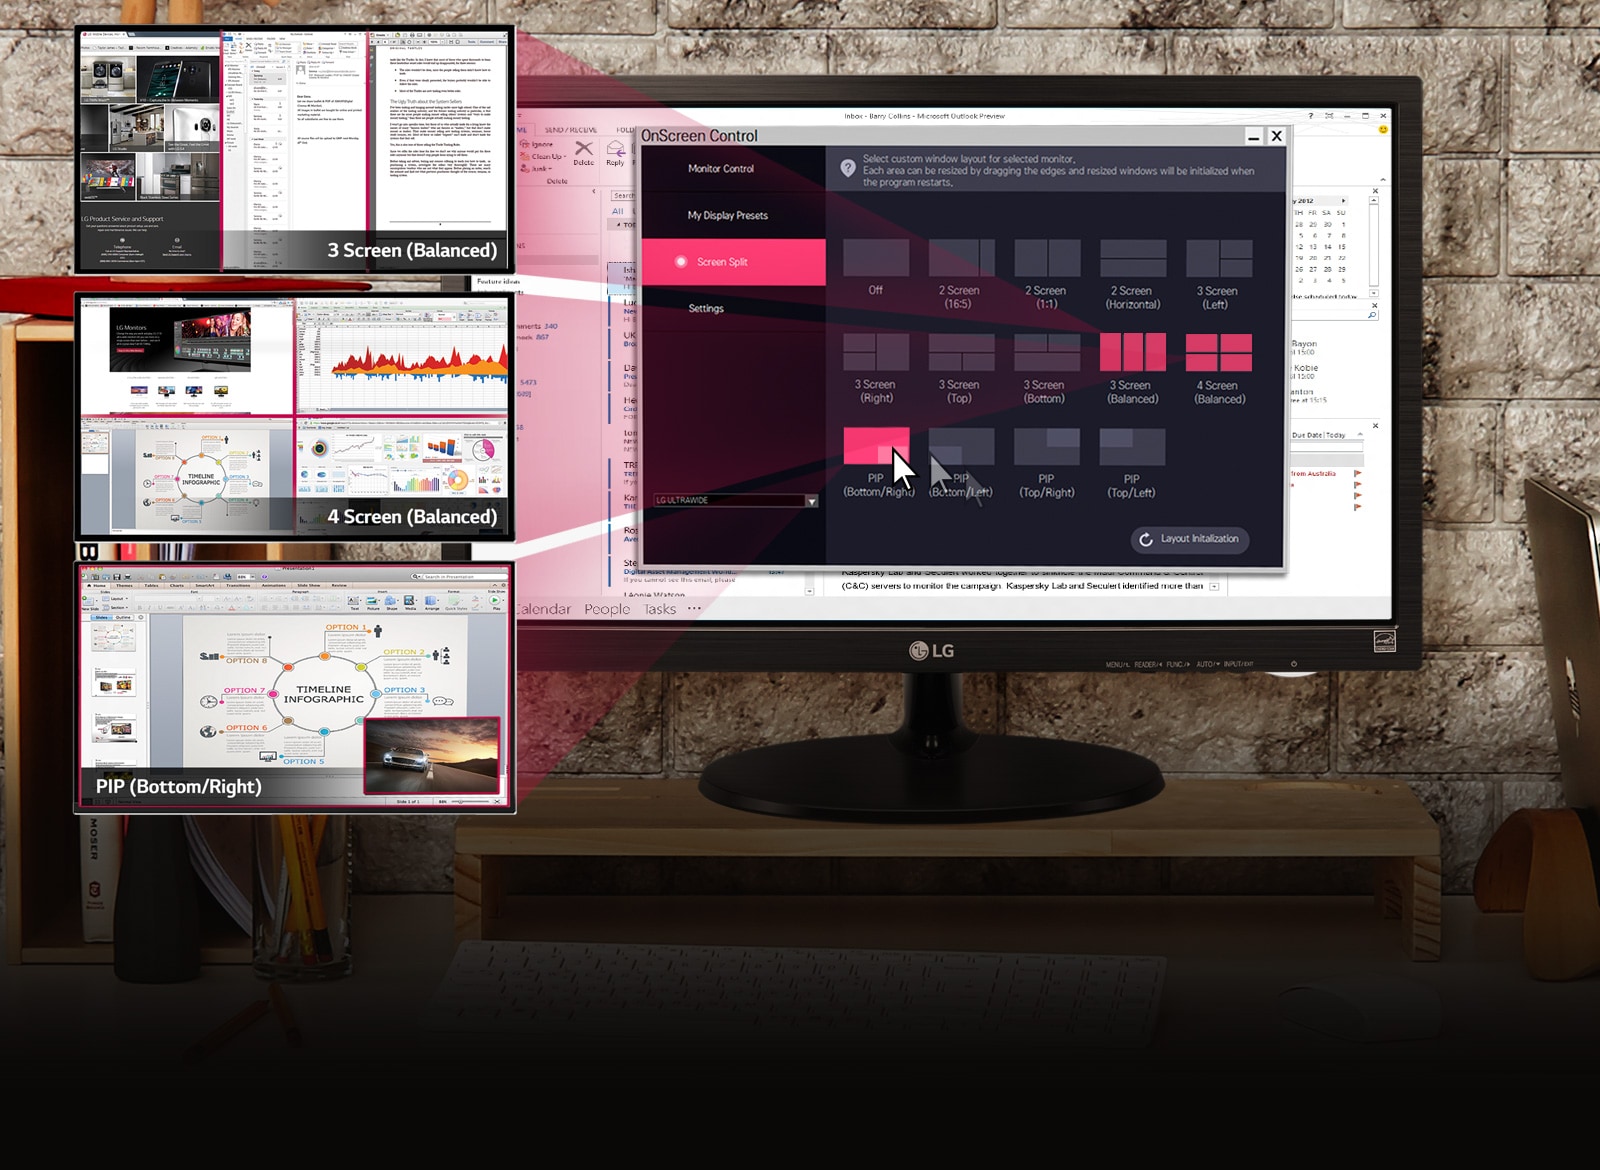 Customize Your Workspace for Multitasking1